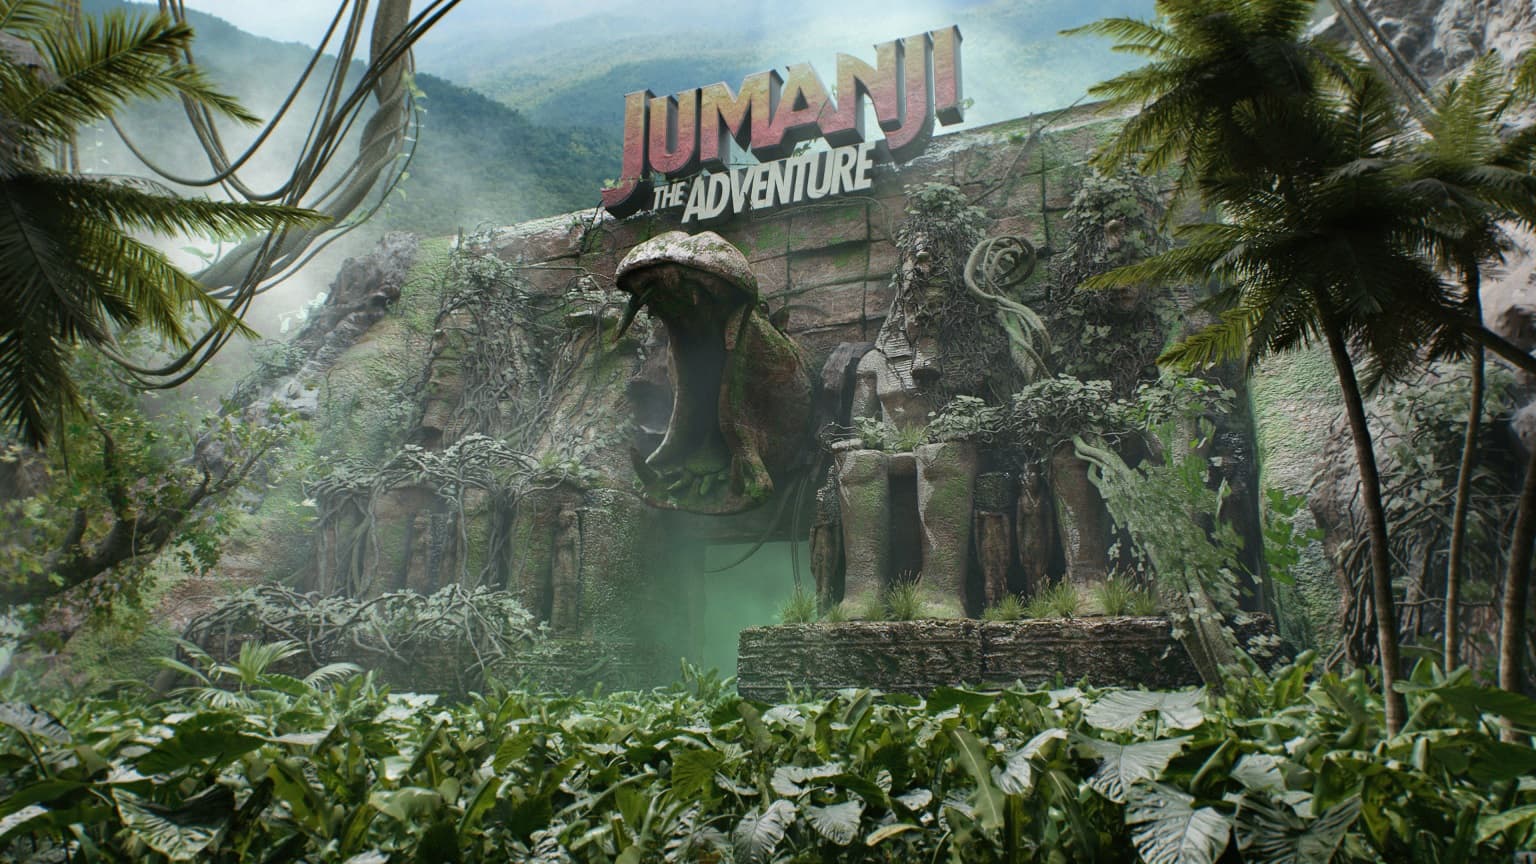 Sony Pictures Entertainment and Merlin Entertainments join forces to bring Jumanji brand to life